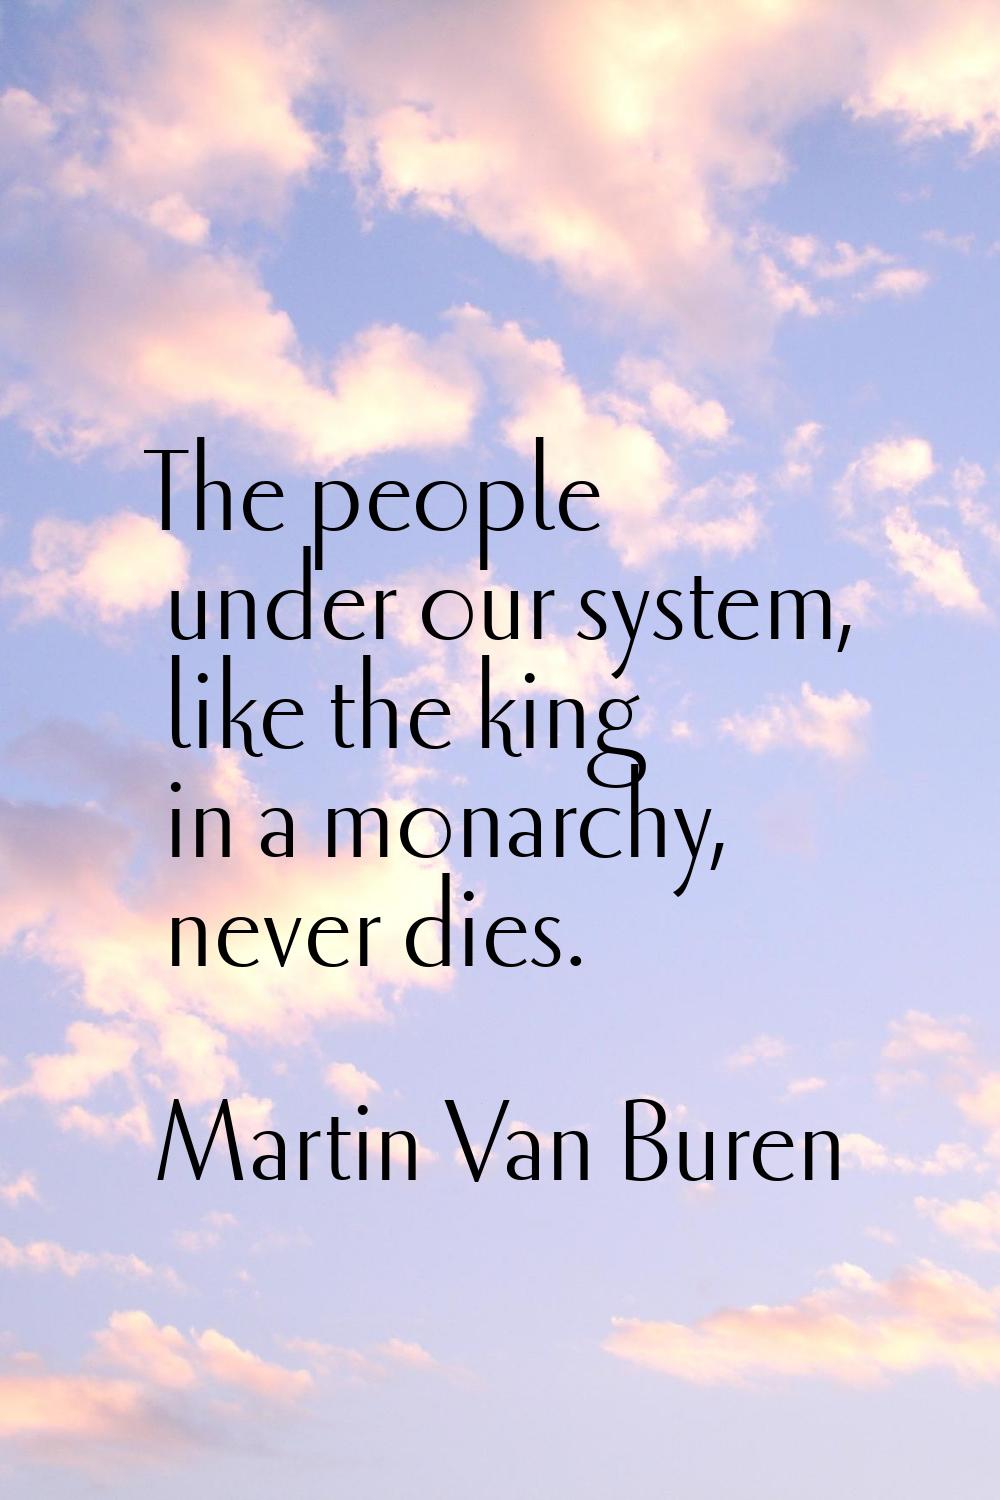 The people under our system, like the king in a monarchy, never dies.